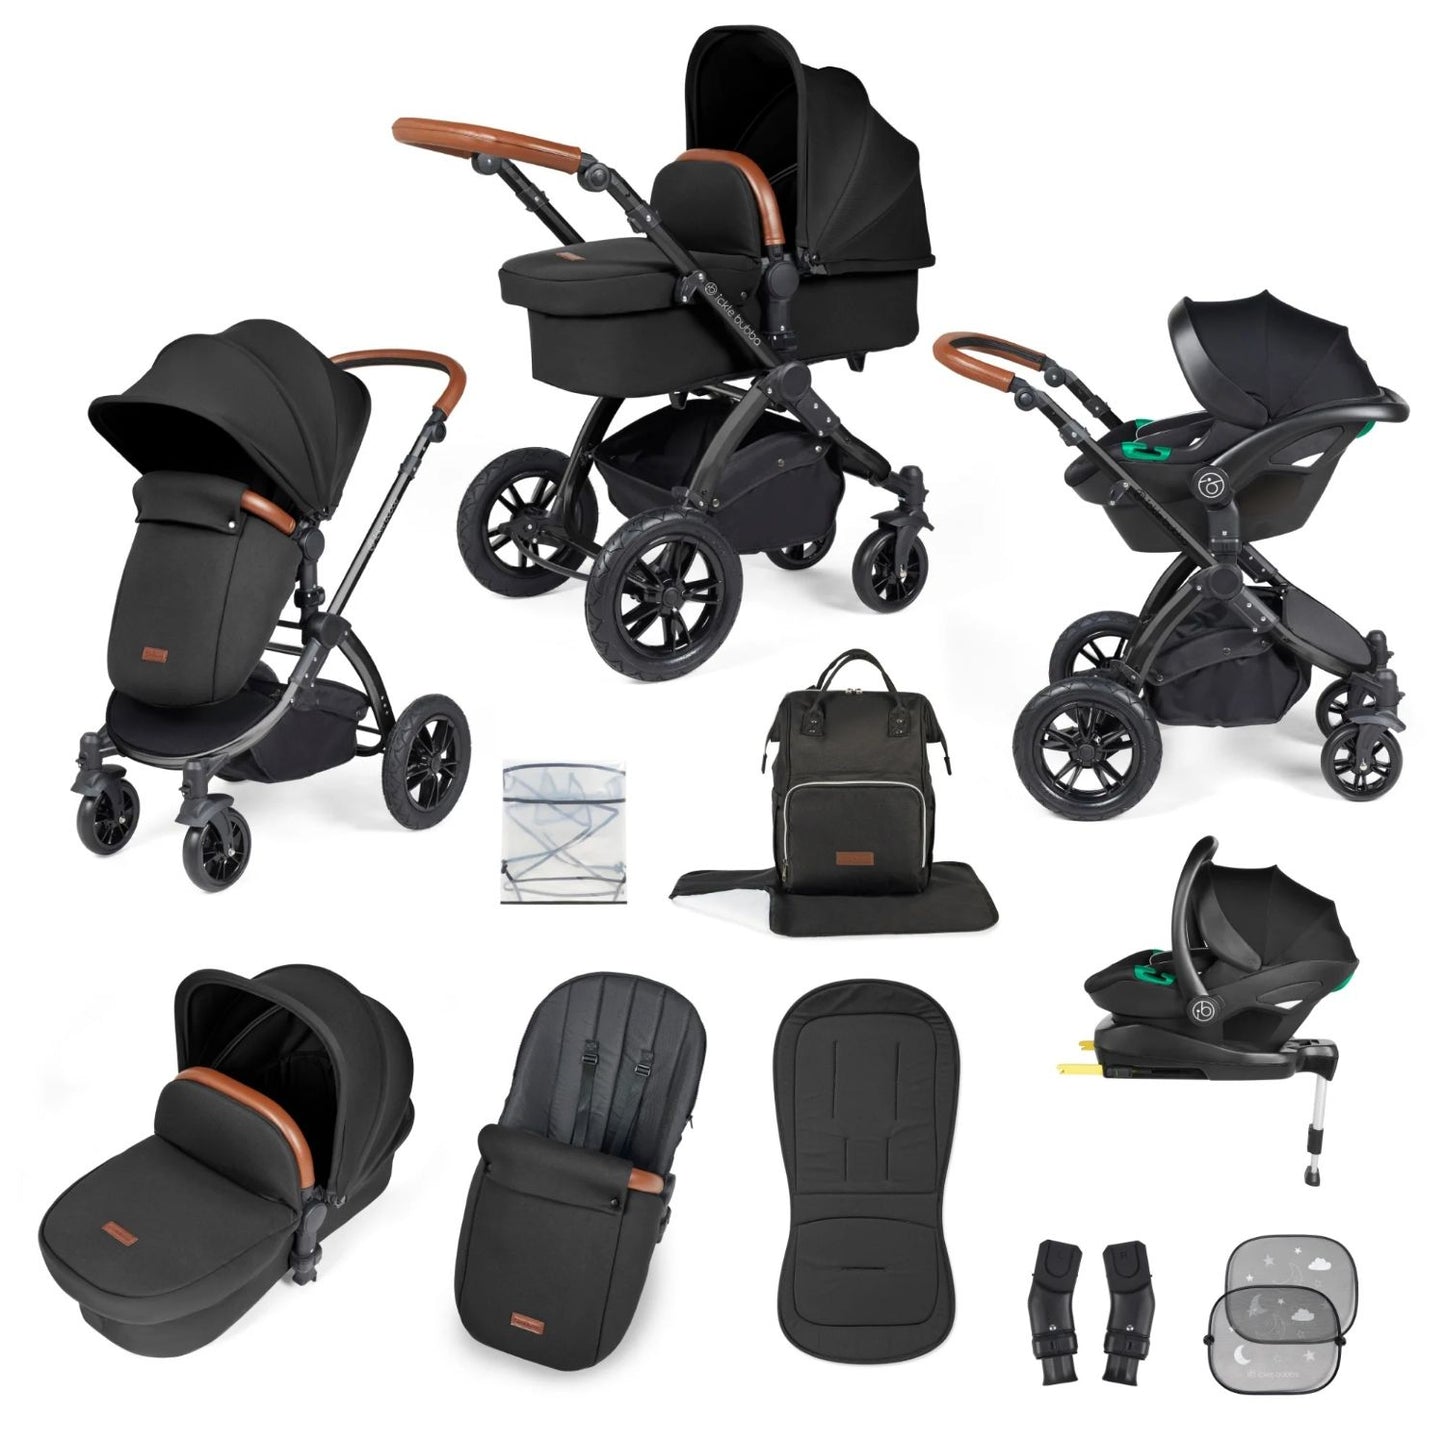 Ickle Bubba Stomp Luxe All-in-One Travel System with Stratus i-Size Car Seat and ISOFIX Base and accessories in Midnight black colour with tan handle